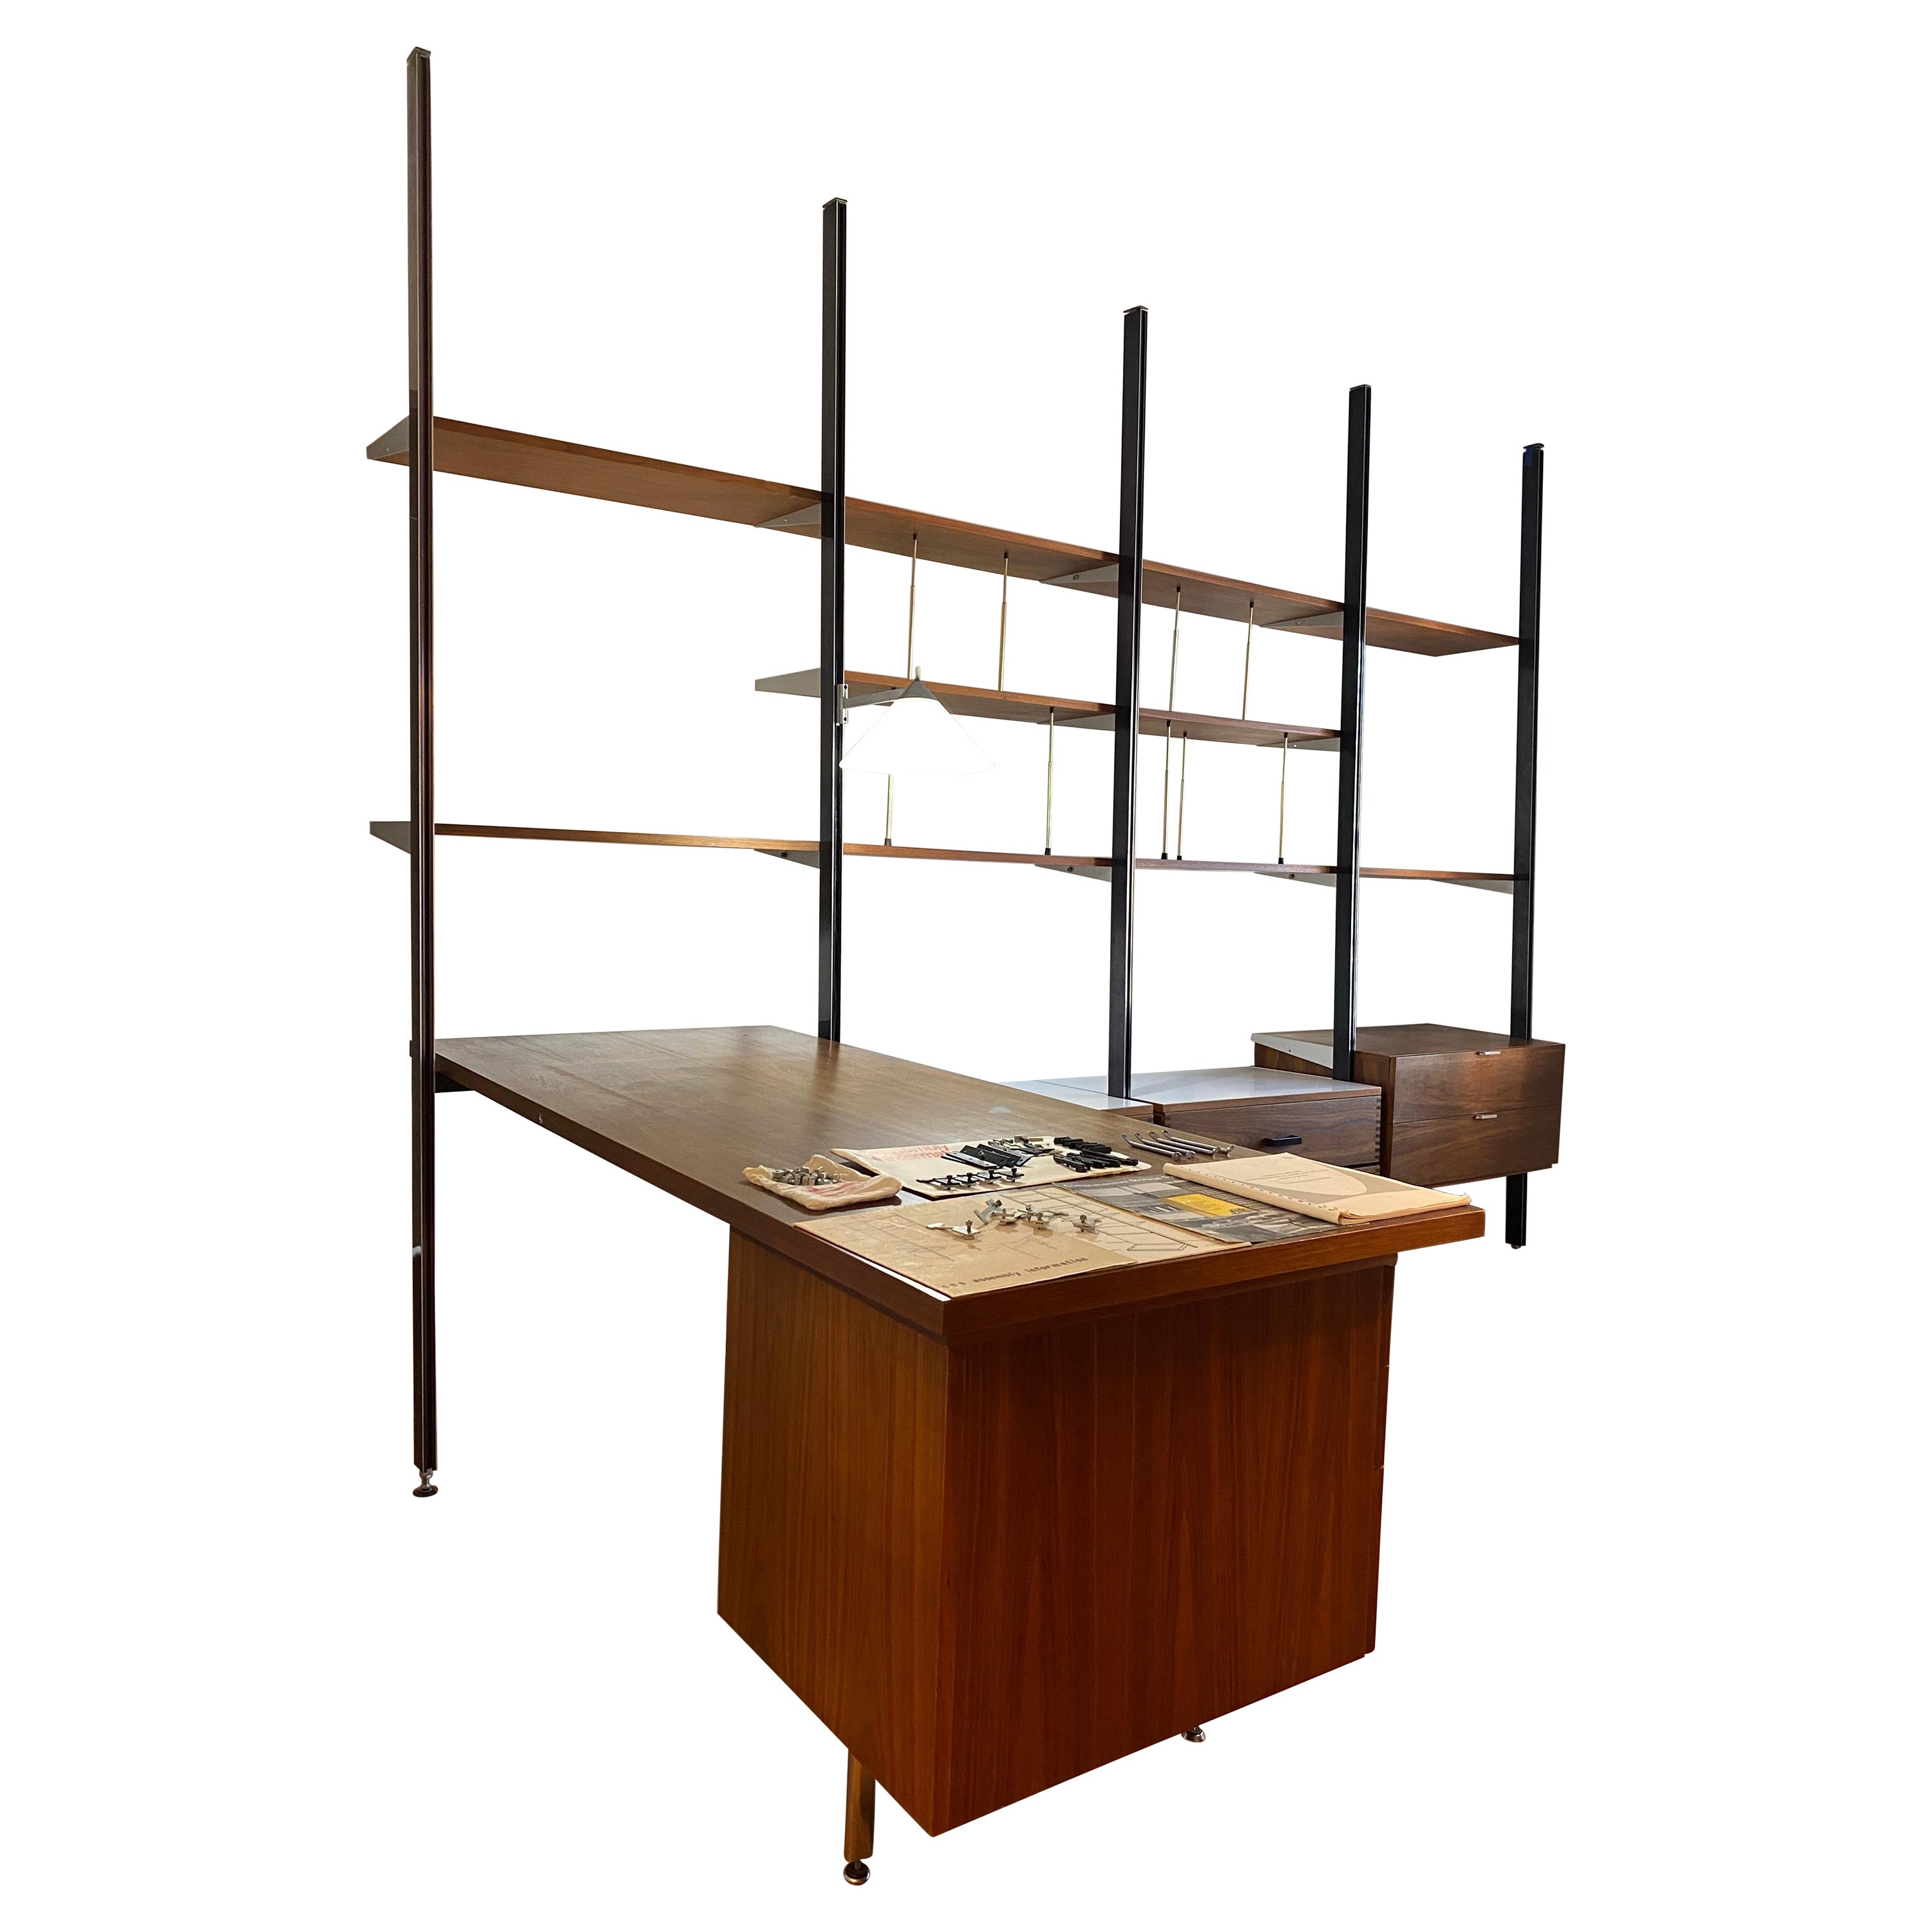 CSS Herman Miller Mid-Century Wall Unit by George Nelson